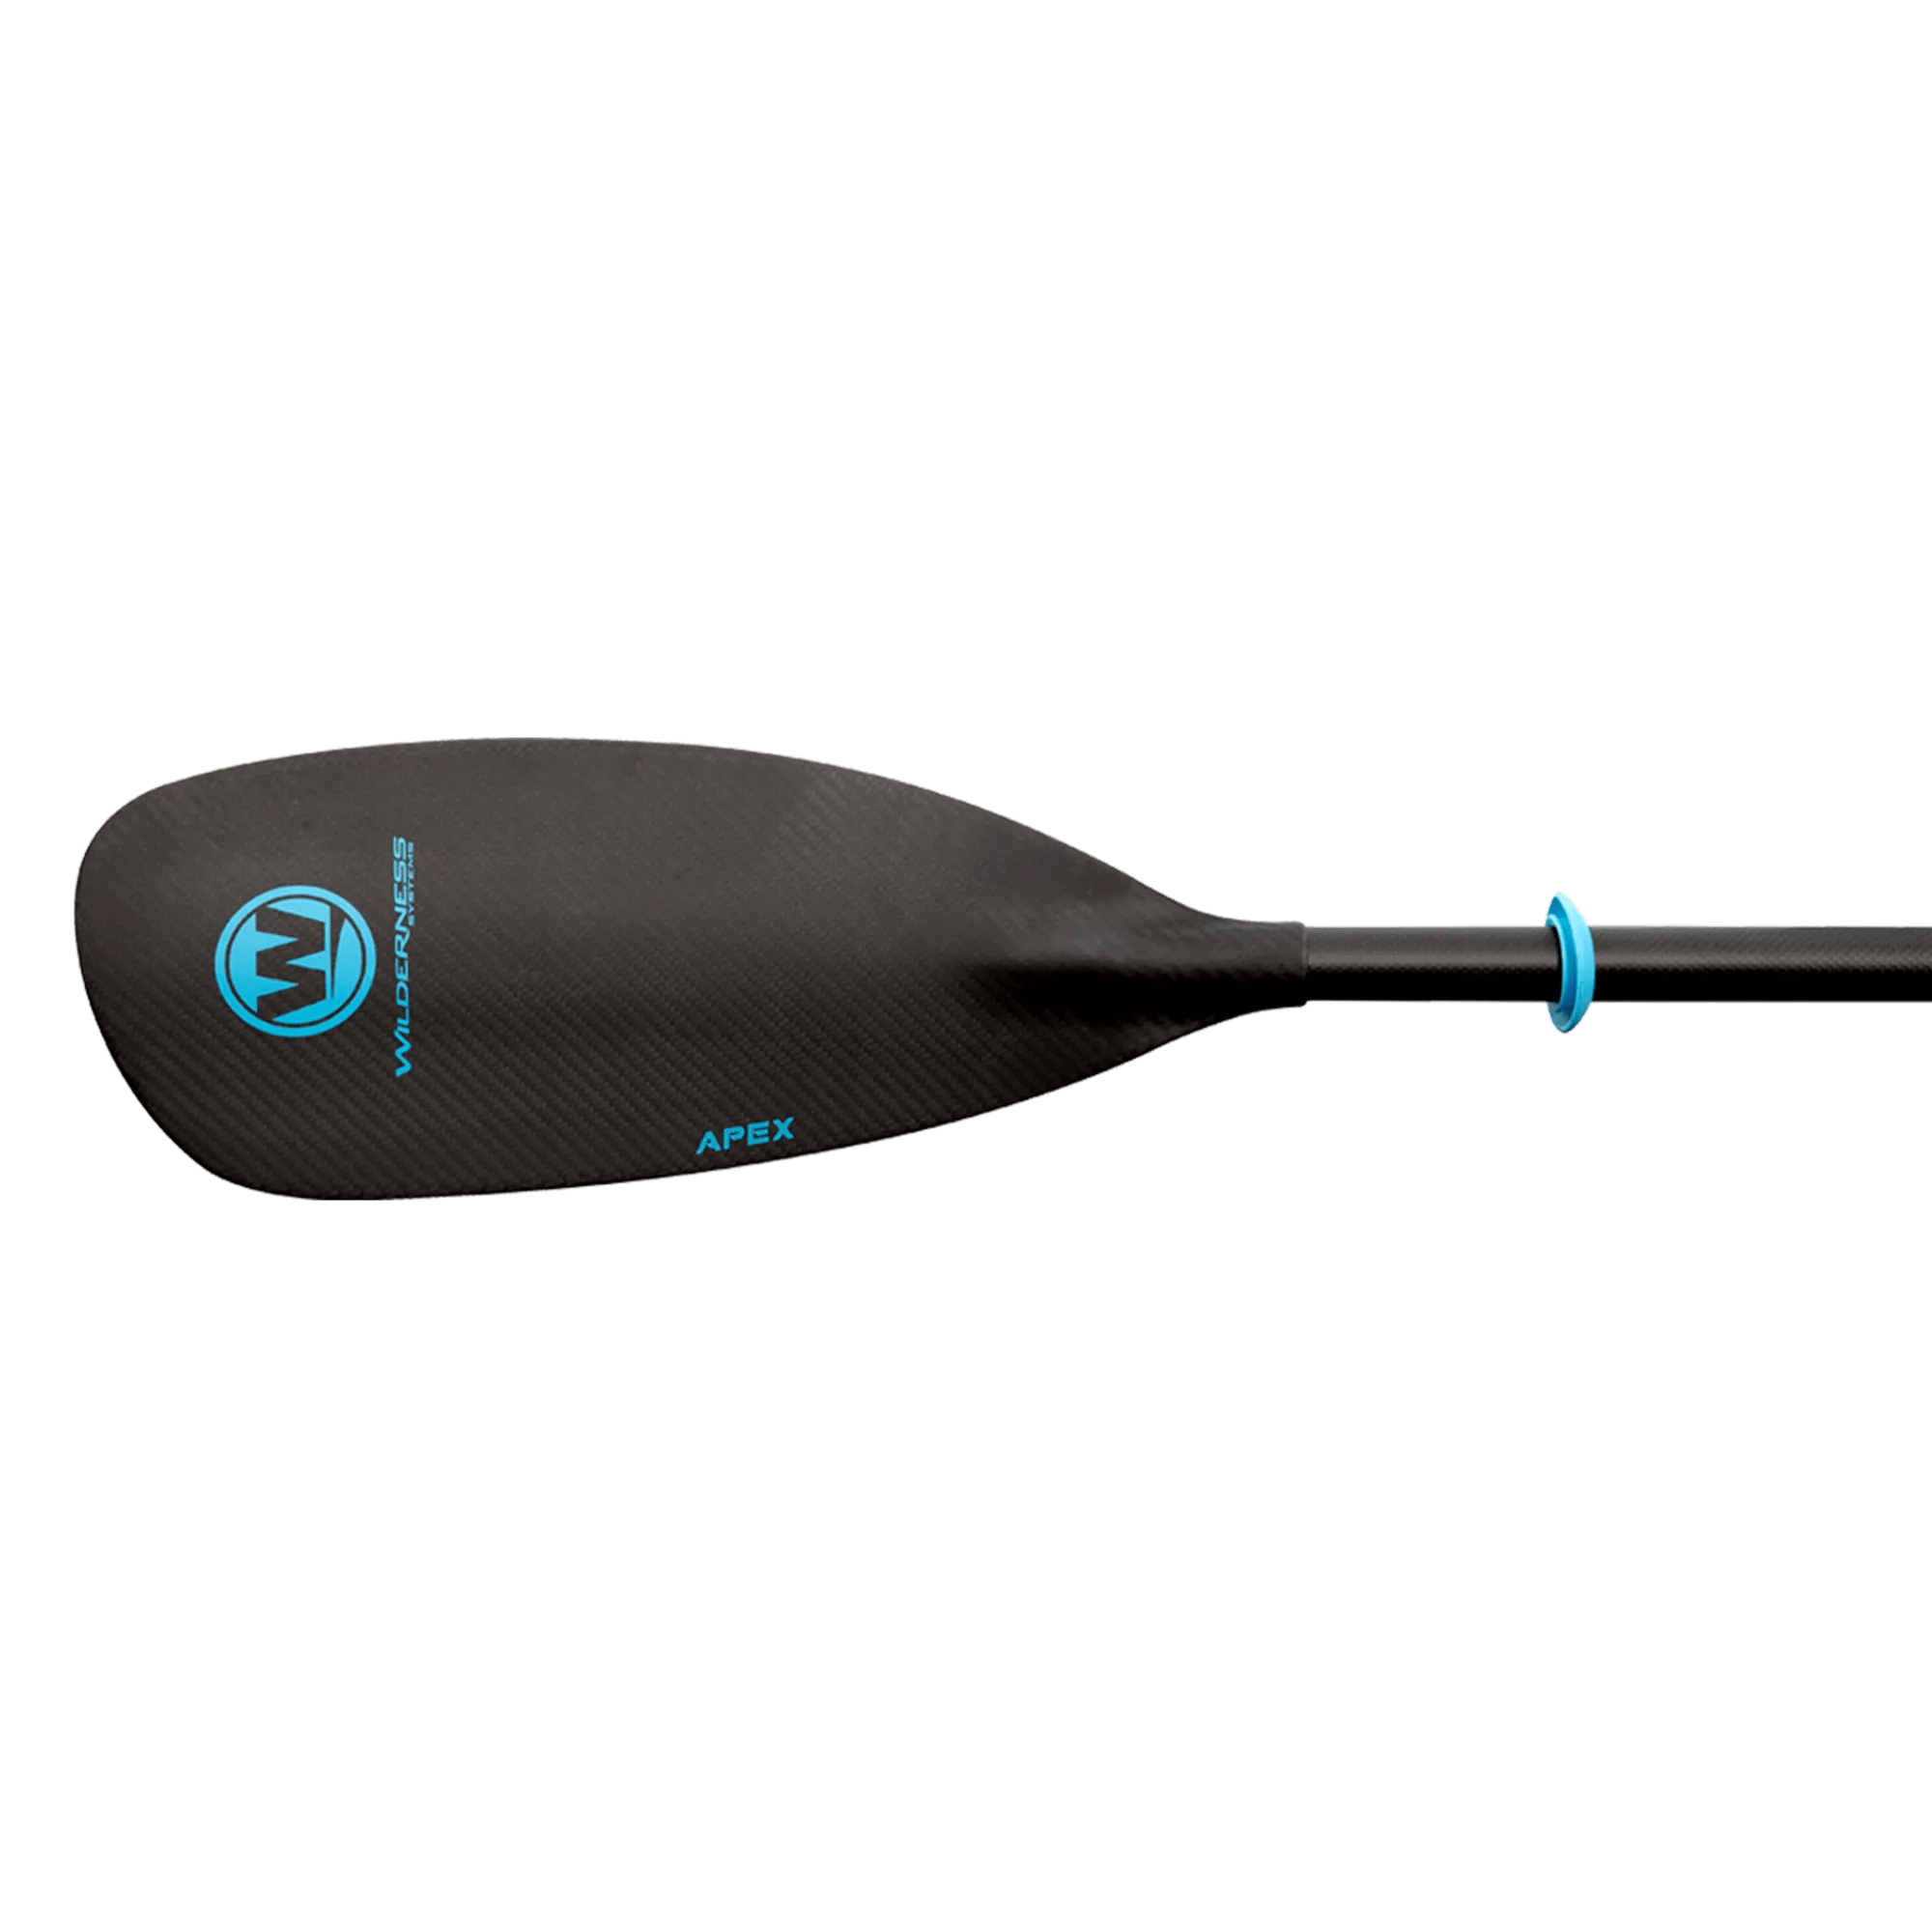 WILDERNESS SYSTEMS - Apex Carbon Kayak Paddle 220-240 cm - Blue - 8070203 - TOP